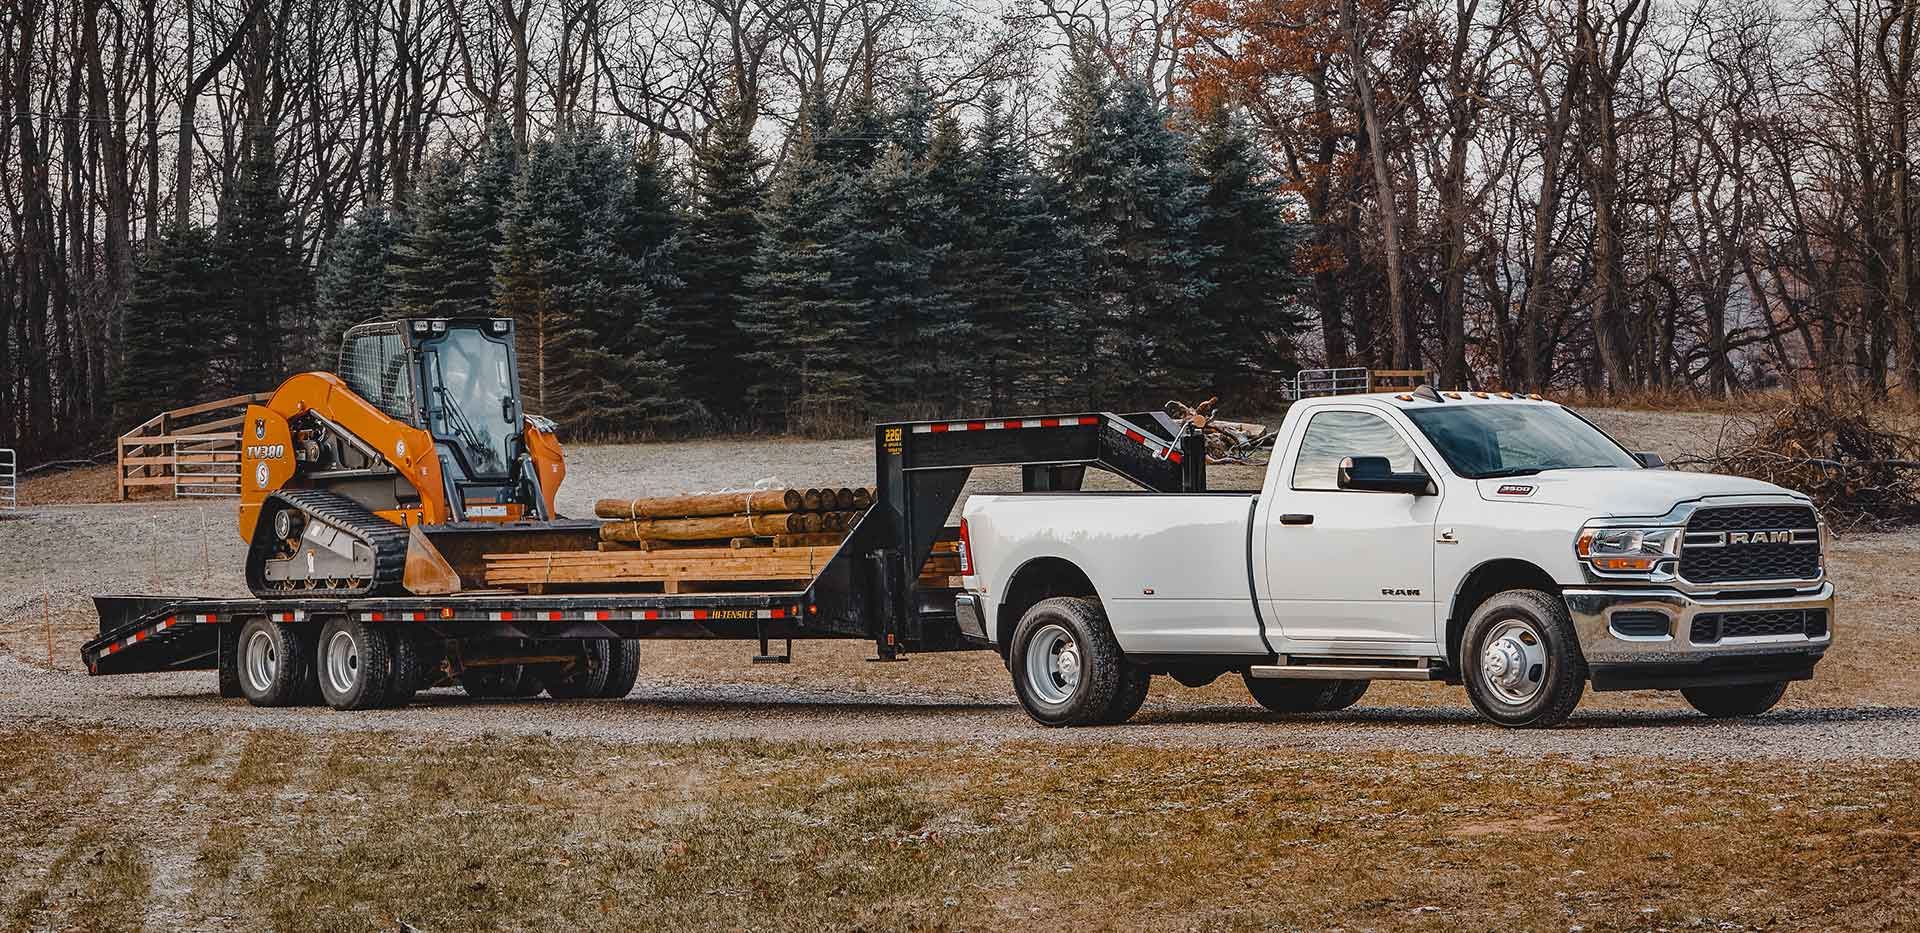 Display The 2022 Ram 3500 towing a flatbed loaded with an excavator.